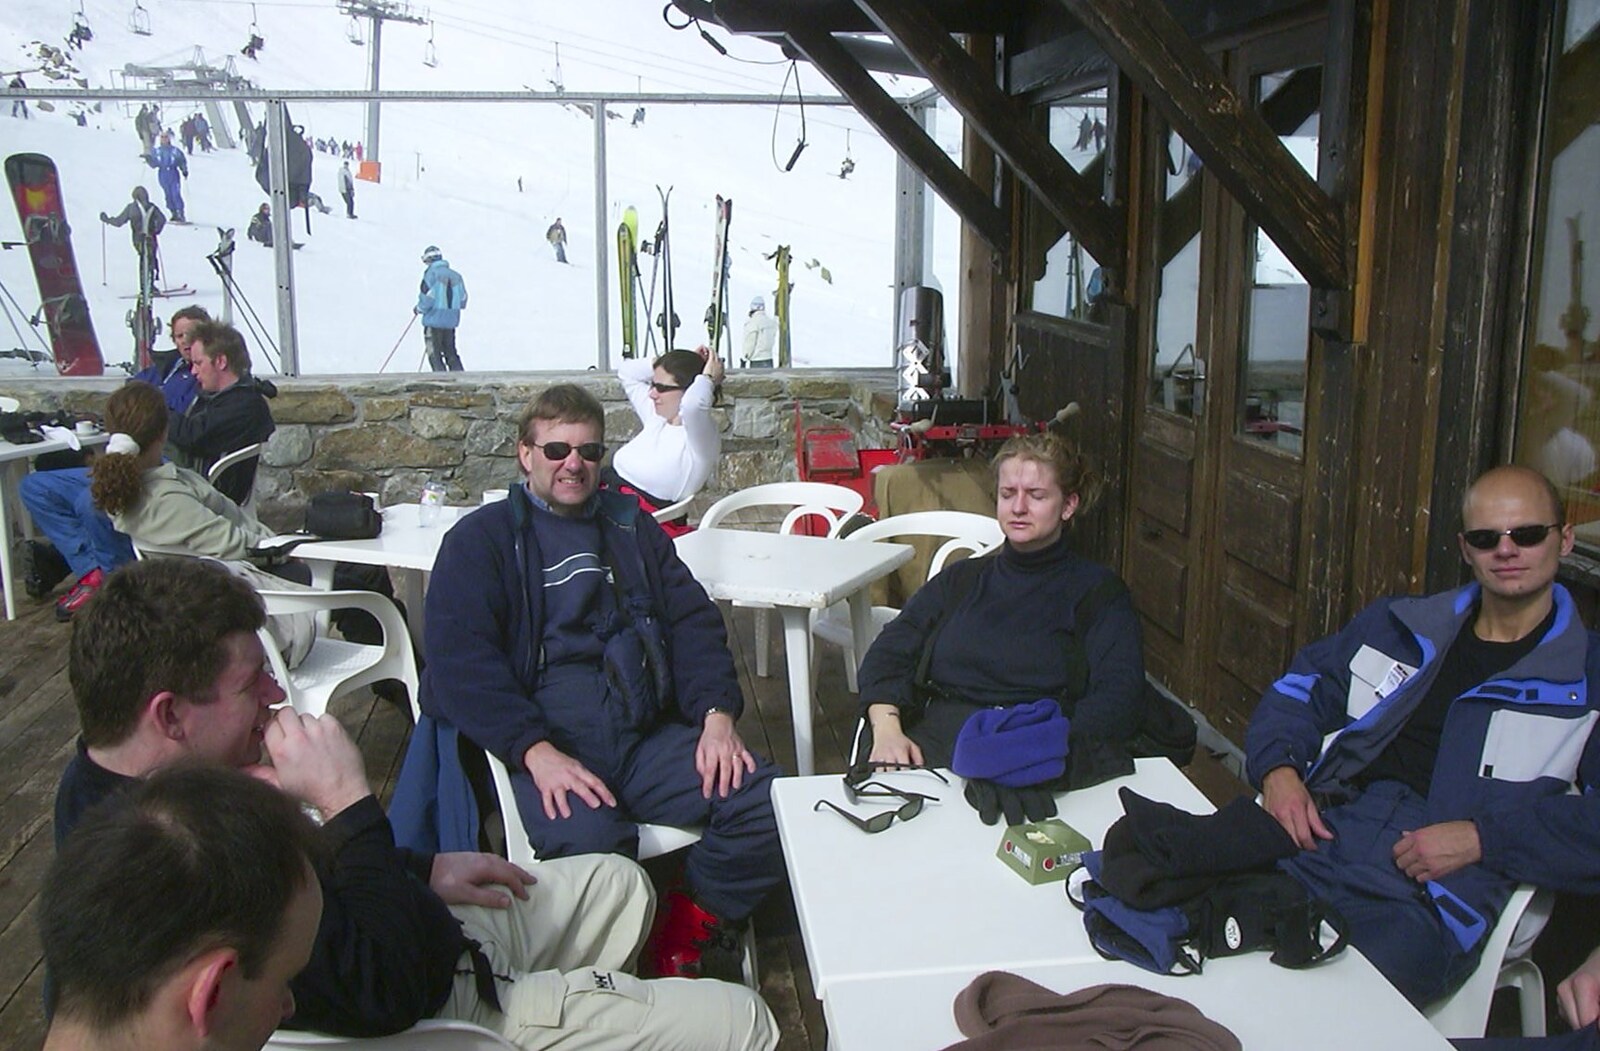 A spot of Apres-ski from 3G Lab Goes Skiing In Chamonix, France - 12th March 2002